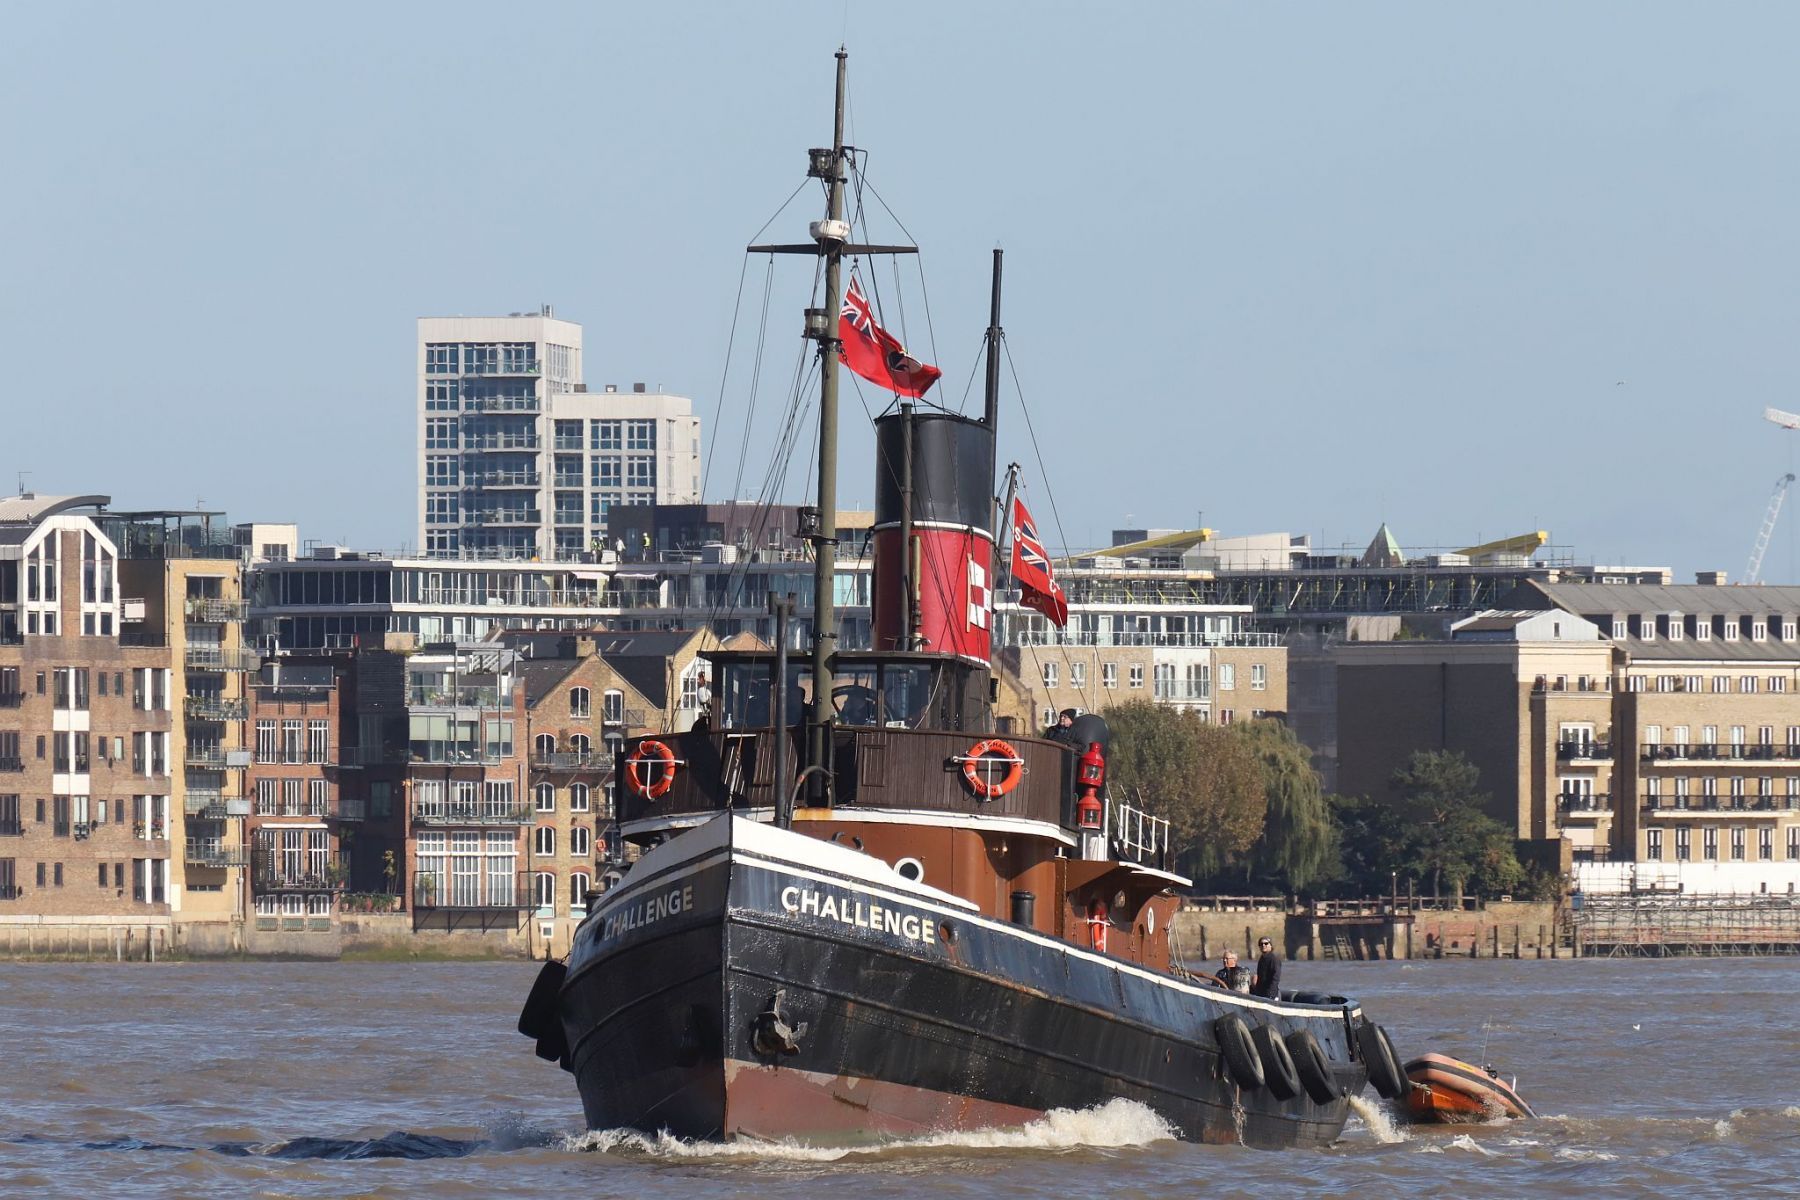 Steam Tug Challenge between Wapping and Rotherhithe in 2022